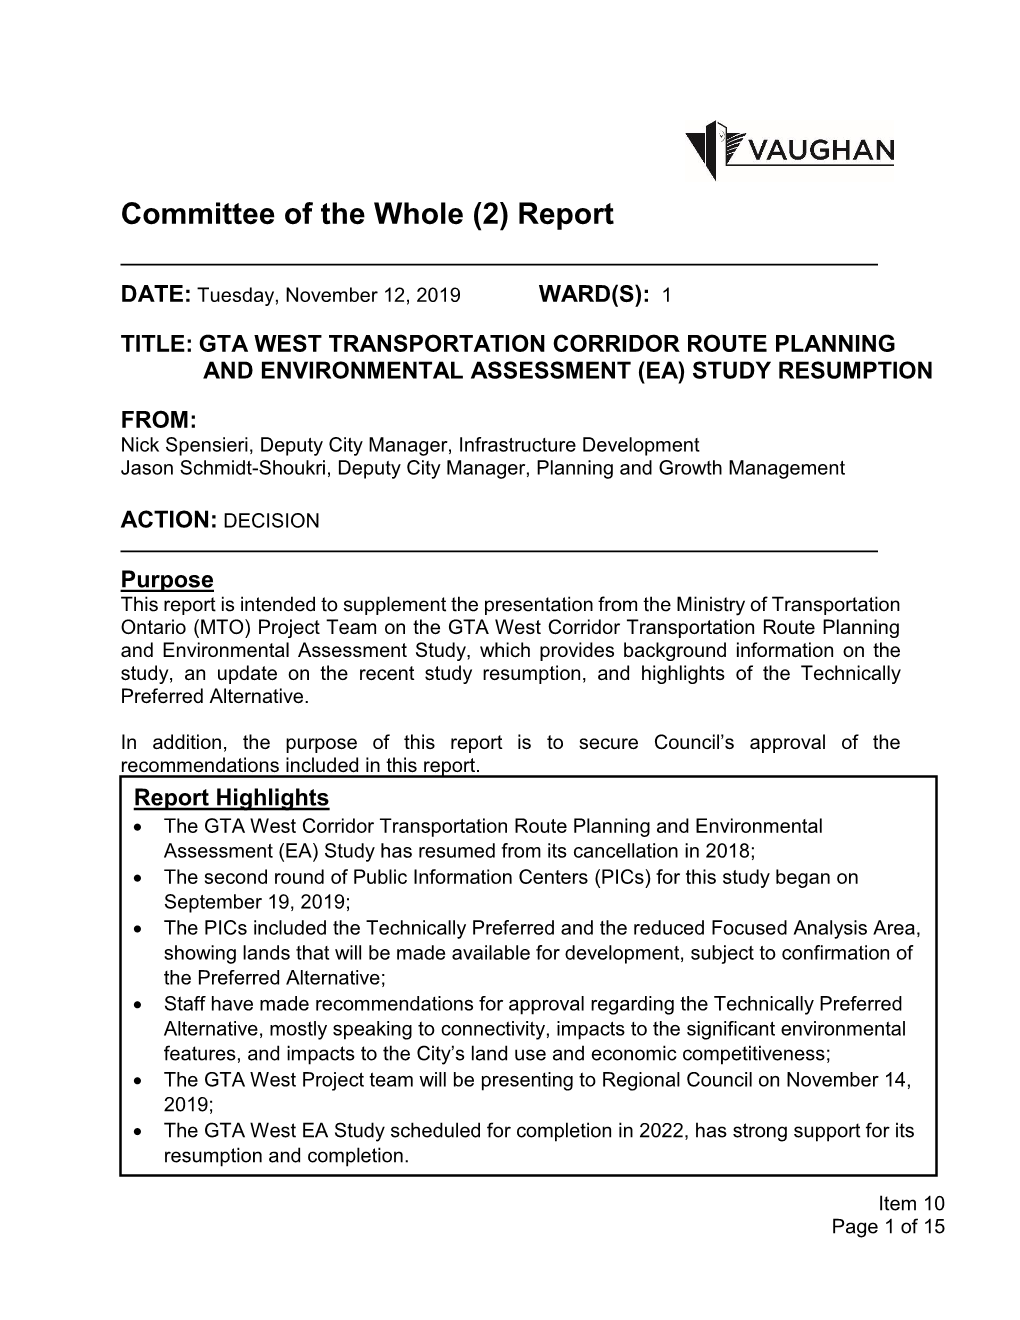 Gta West Transportation Corridor Route Planning and Environmental Assessment (Ea) Study Resumption